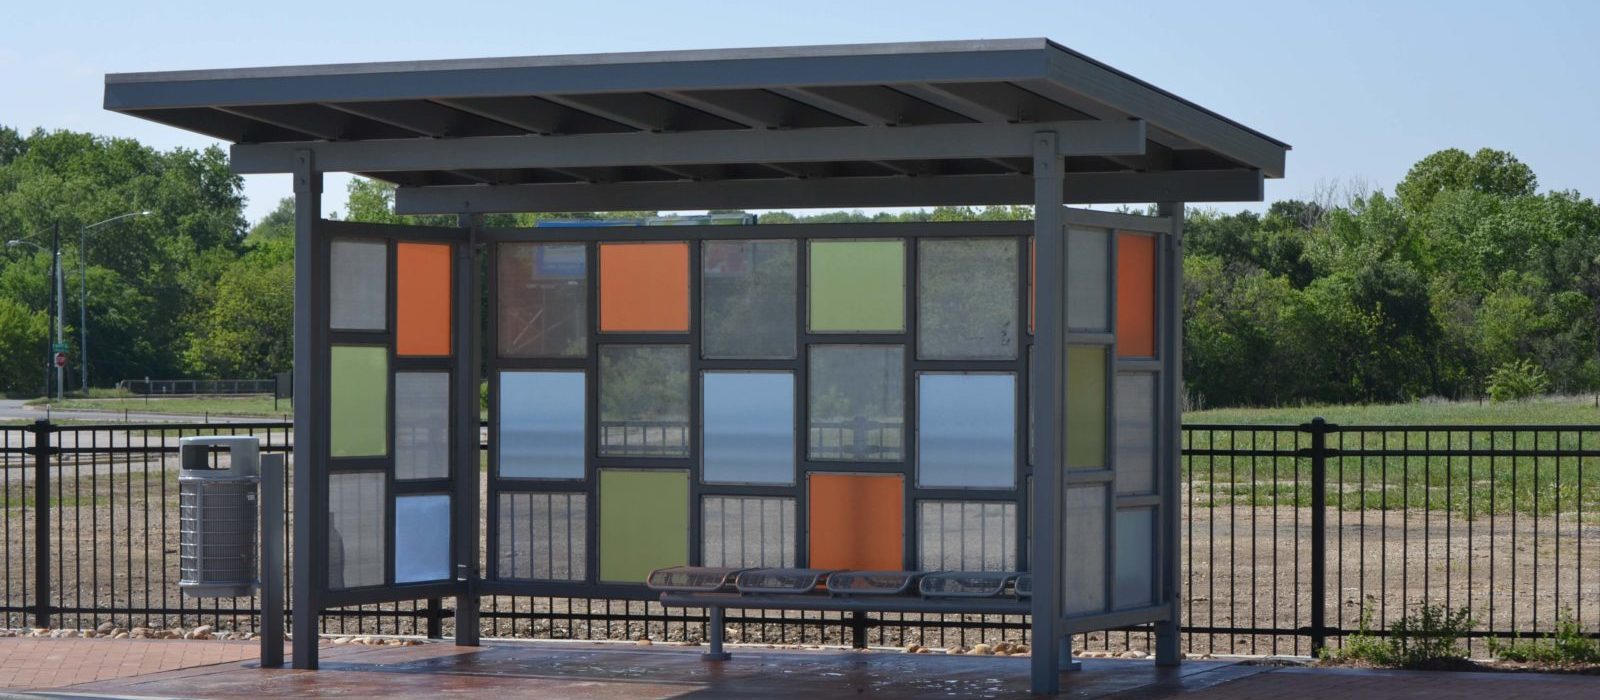 Front view of the Sierra Vista Bus Transfer Stop